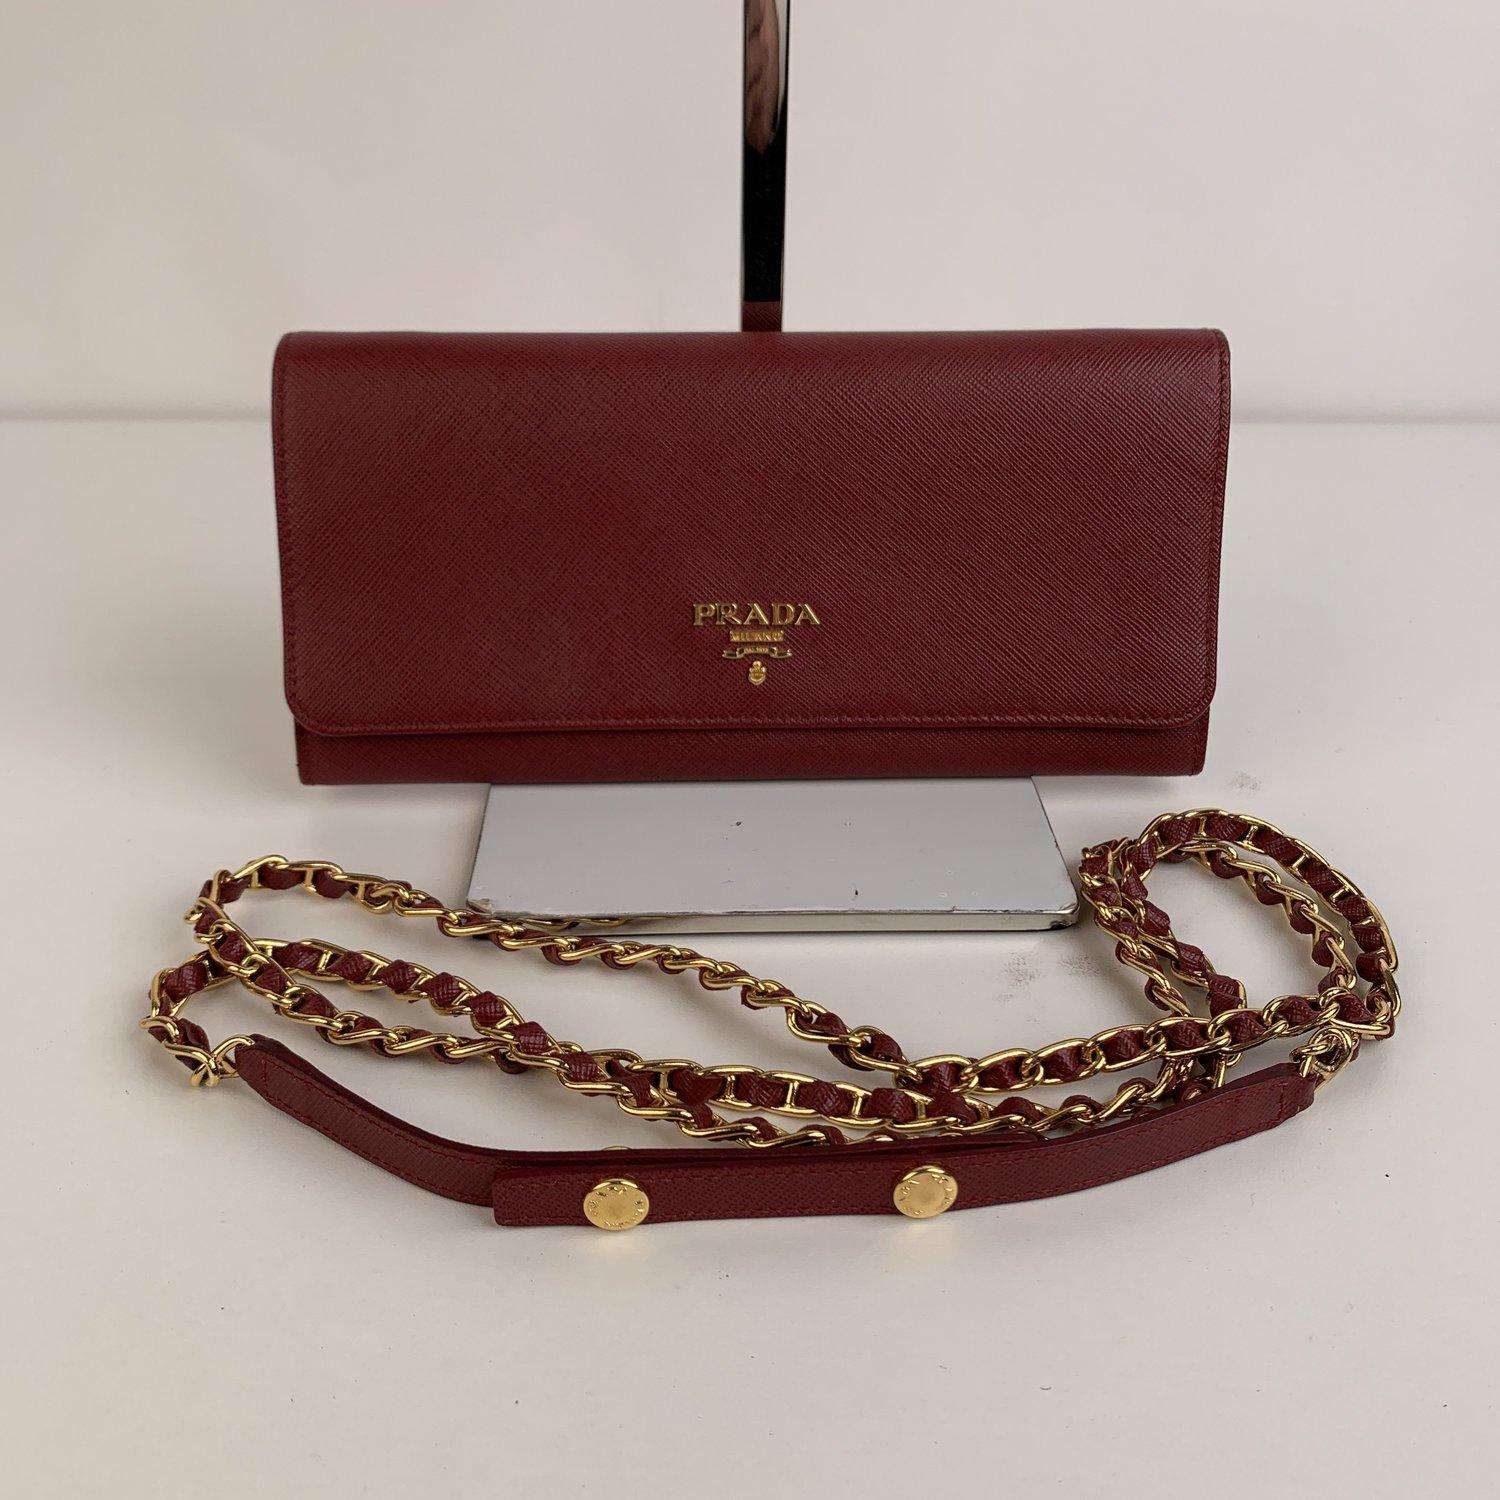 Prada Red Saffiano Leather Continental Wallet on Chain Woc 1